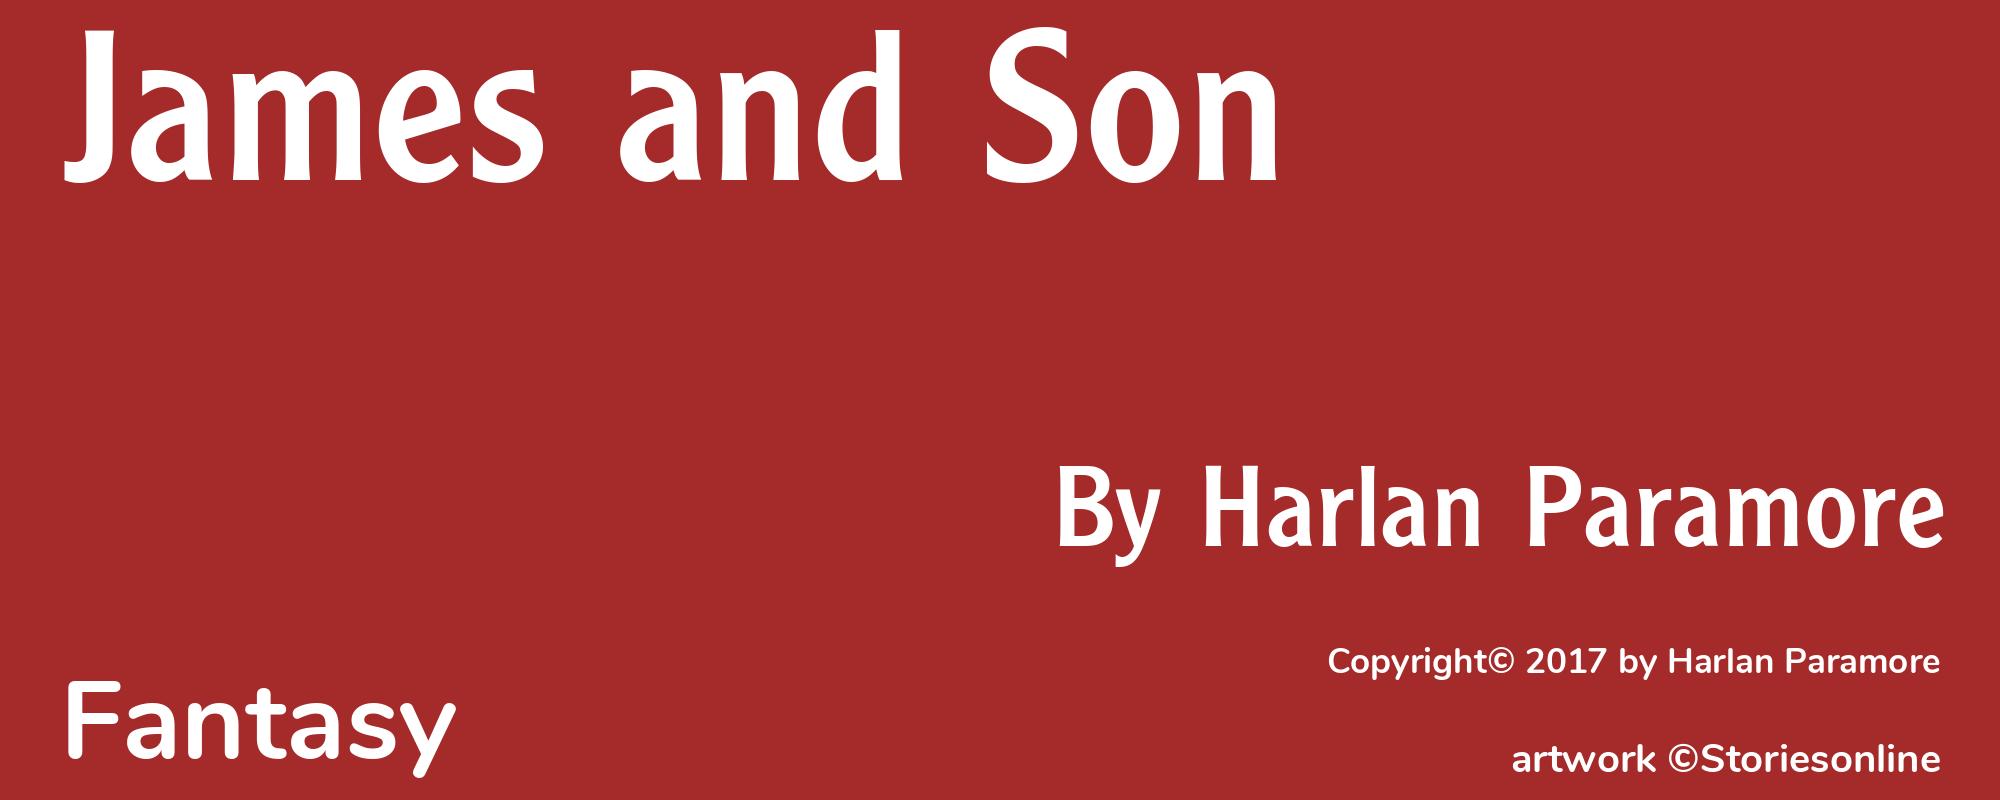 James and Son - Cover